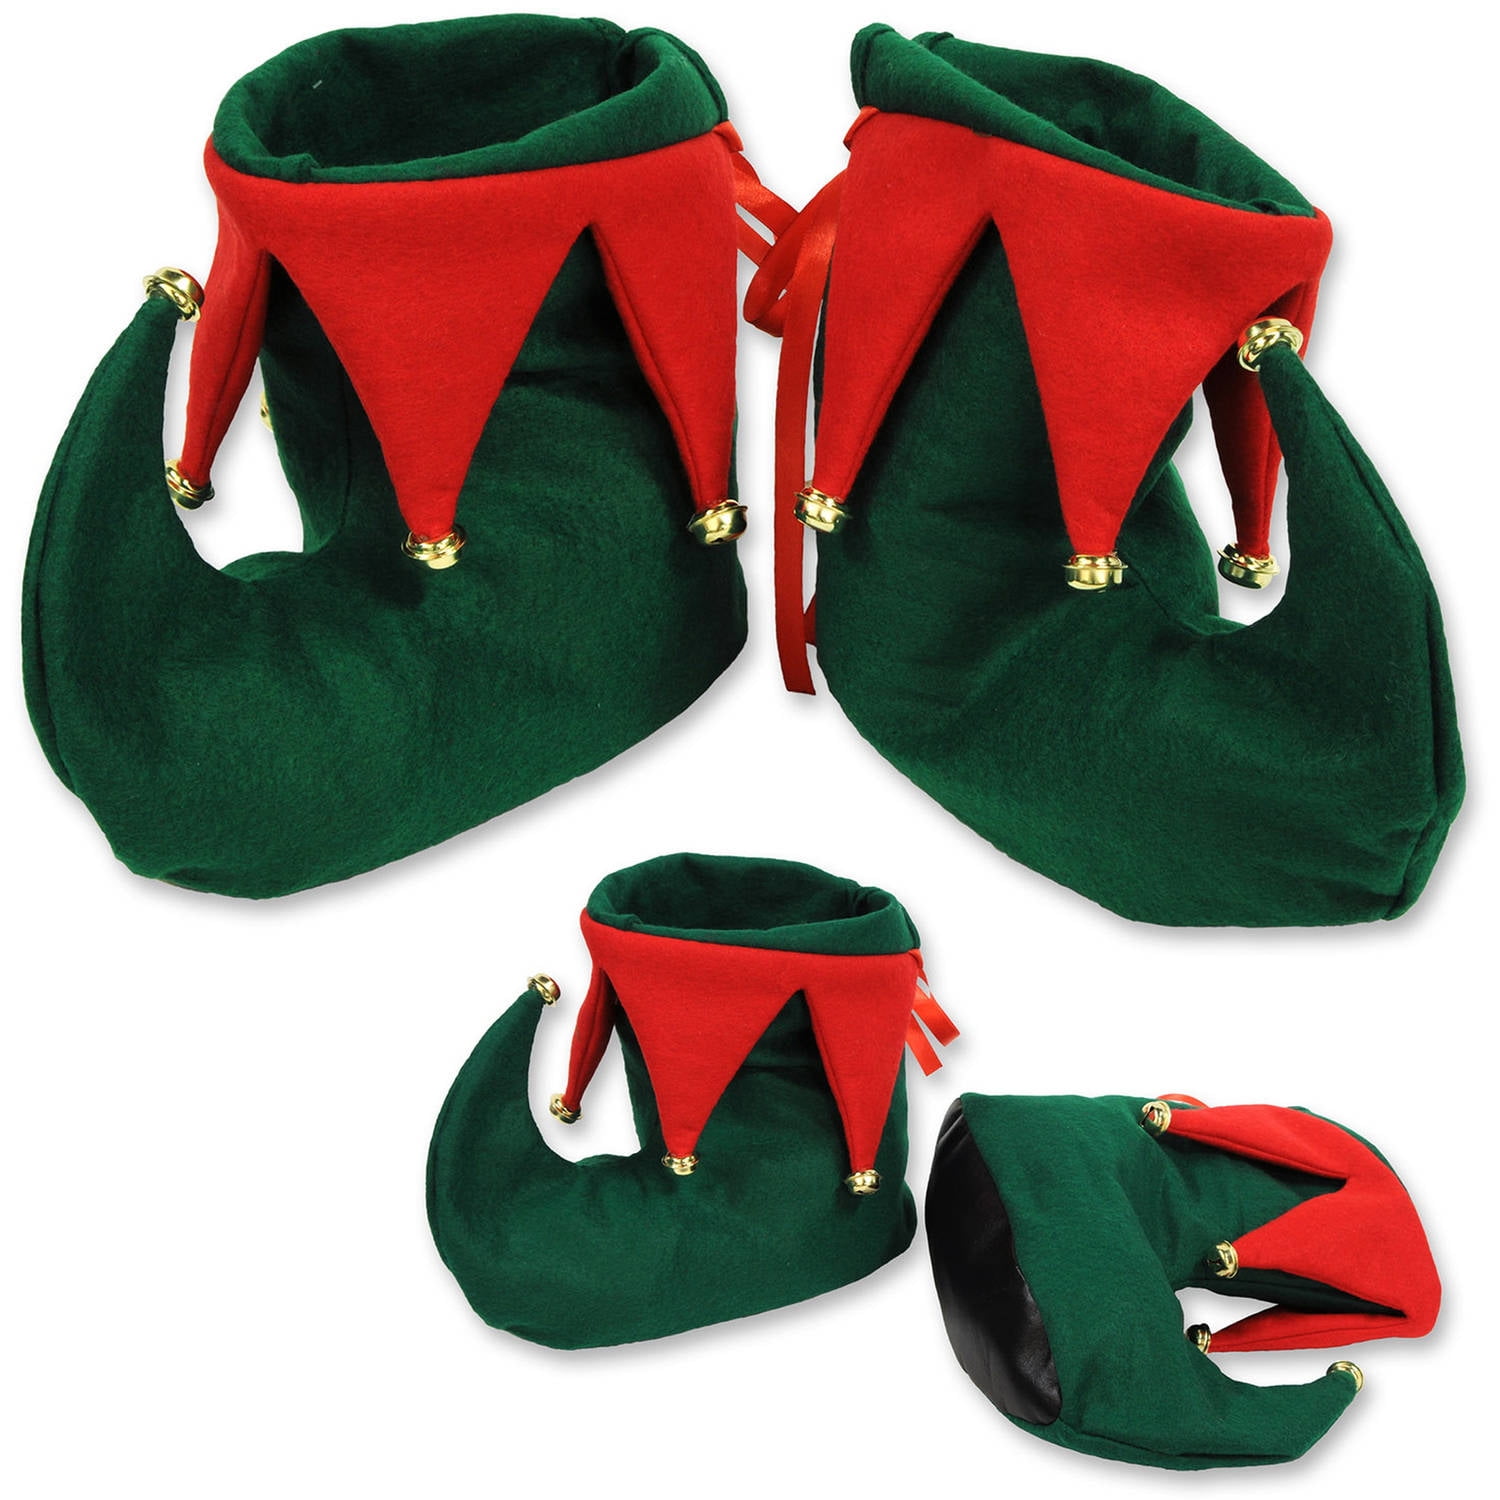 Adult Christmas Elf Shoes Red And Green Booties 